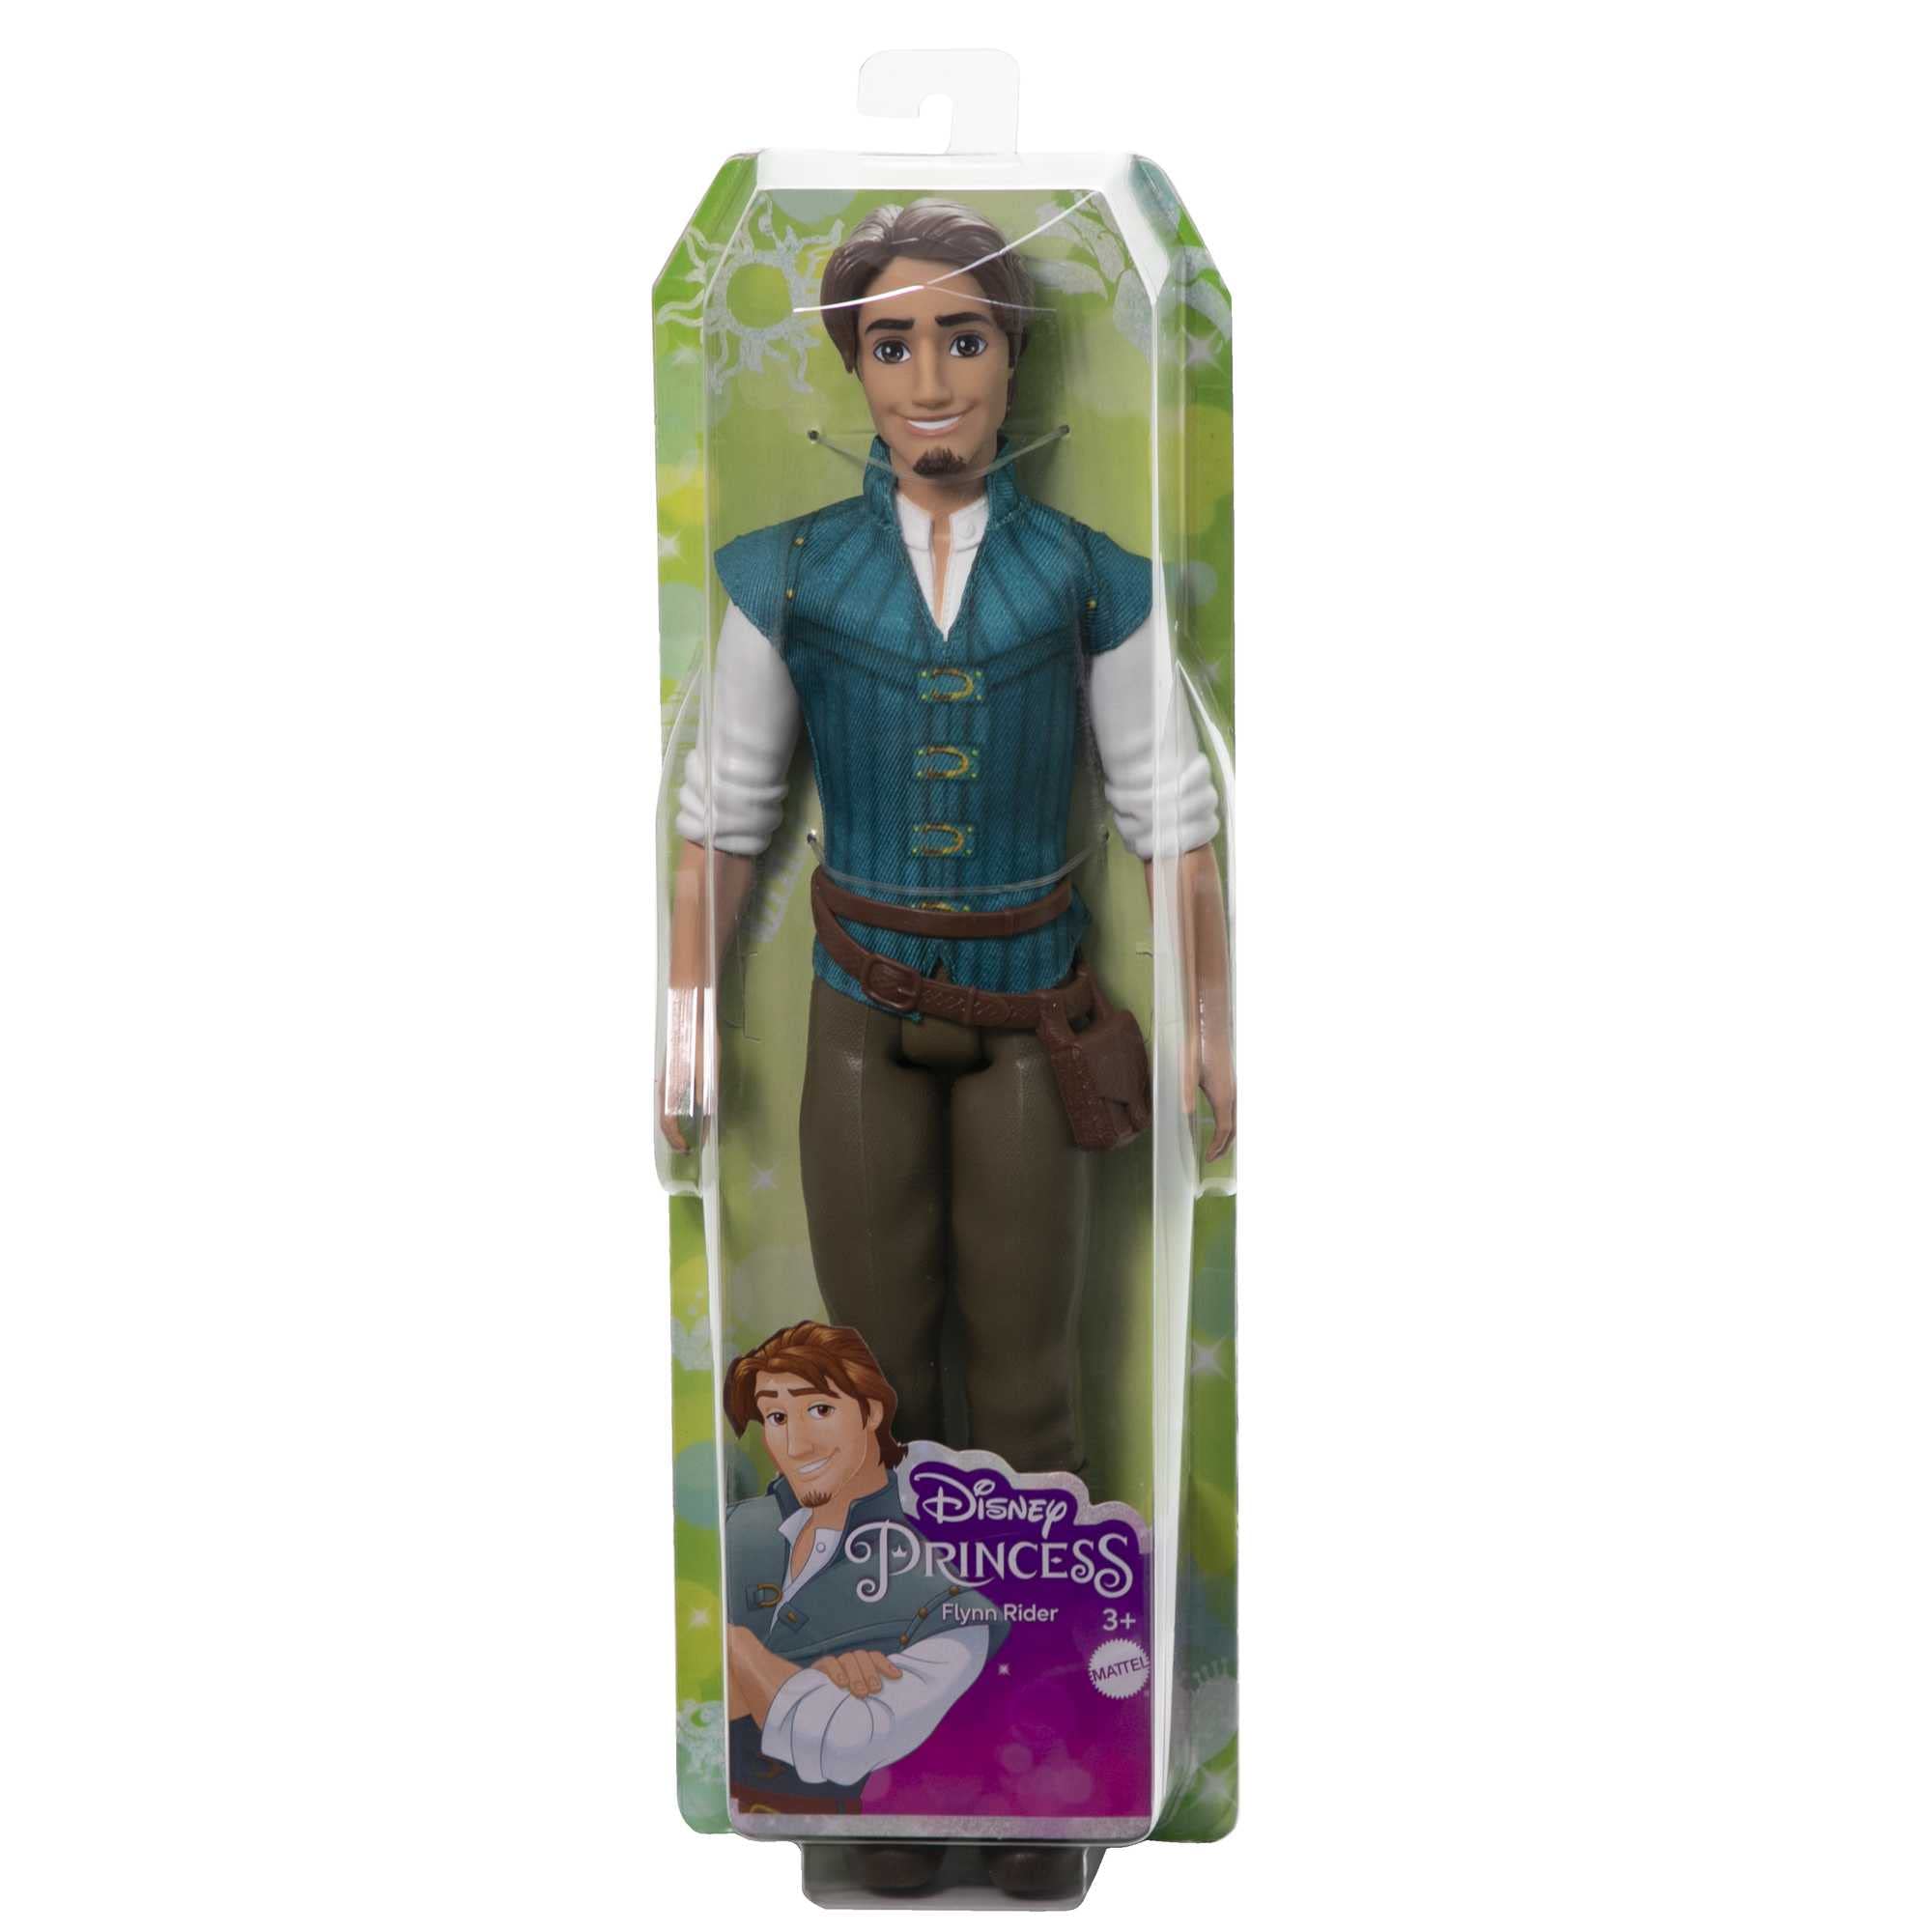 Mattel Disney Princess Flynn Rider Fashion Doll in Hero Outfit from Disney Movie Tangled, Posable